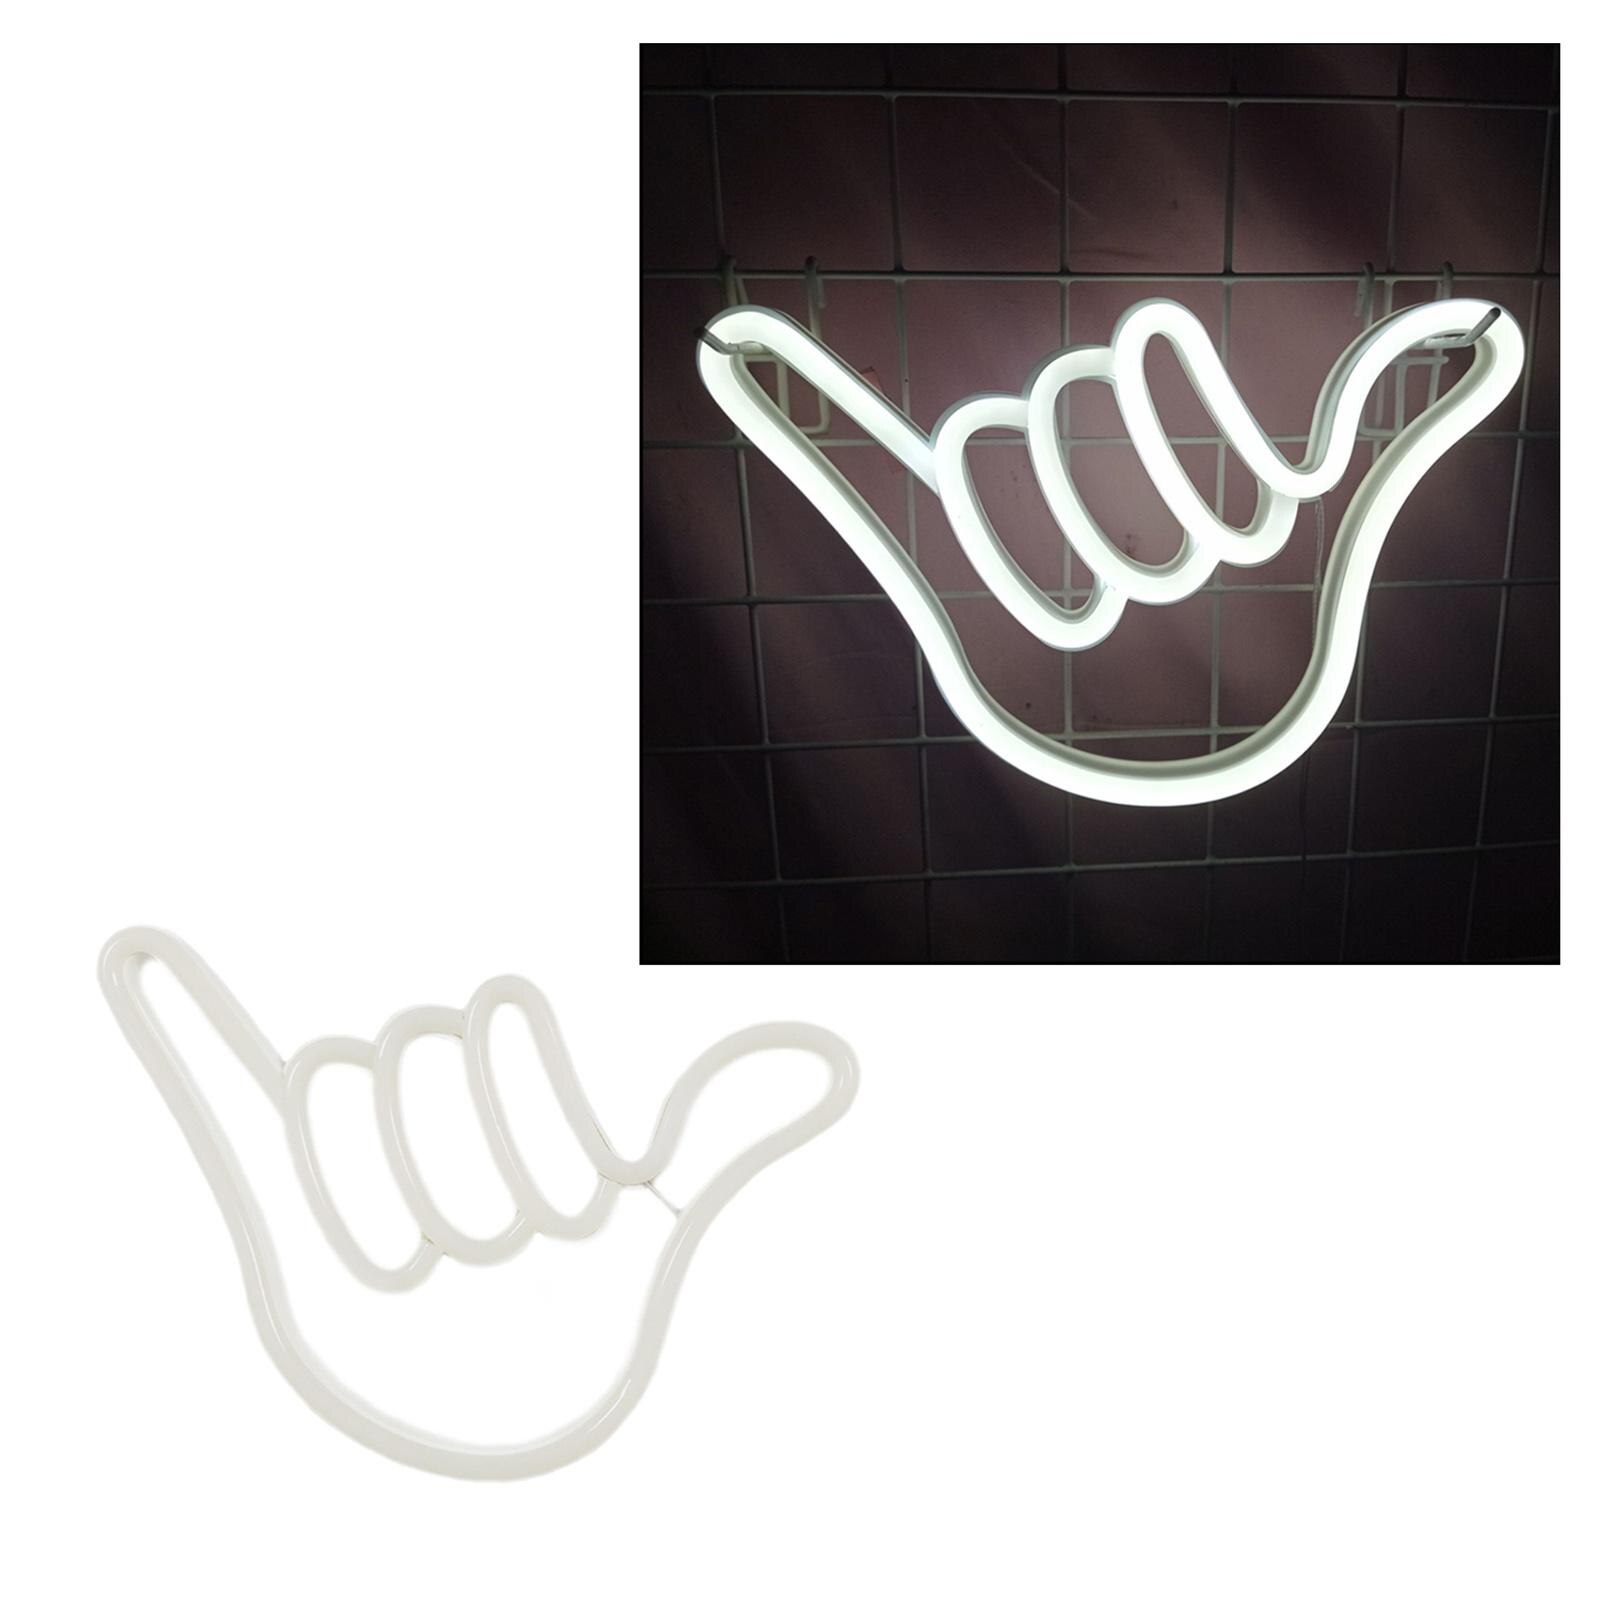 USB Peace Gesture LED Neon Light Hand Light up Battery/USB Operated Art Decorations Light for Wall Decor Xmas Bedroom Party Home